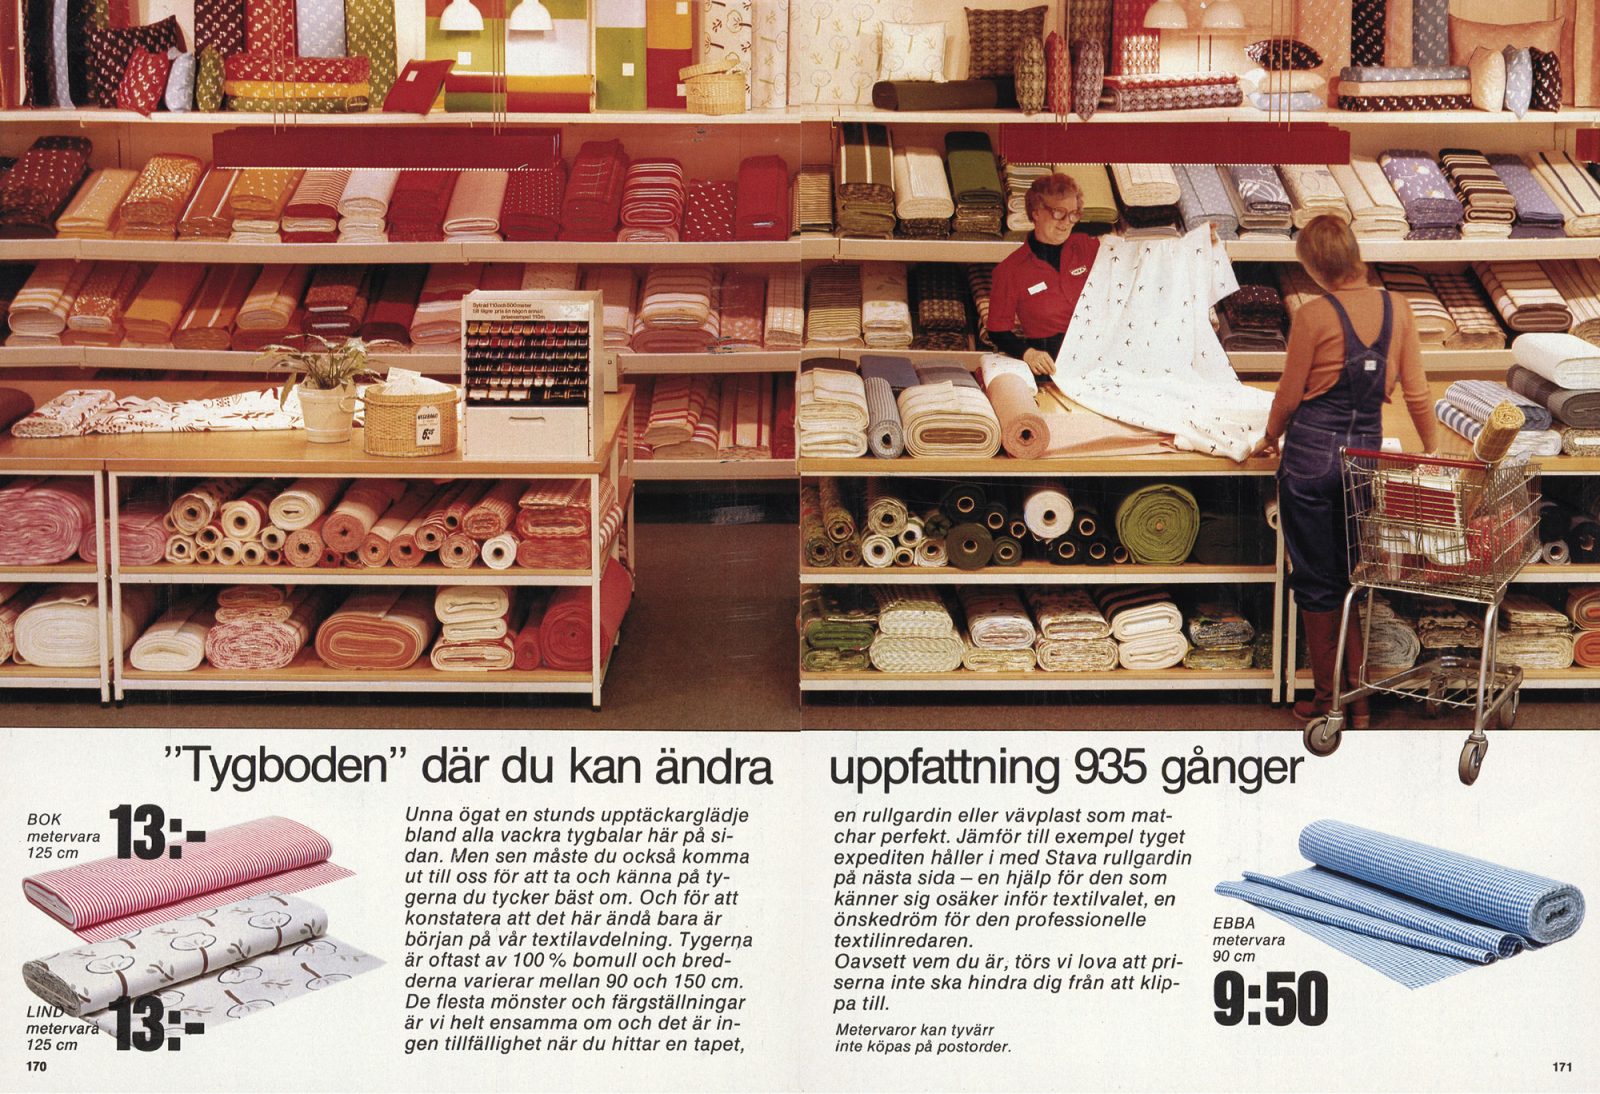 1980 IKEA catalogue spread showing fabric rolls on slanted shelves, an employee showing a customer a fabric.